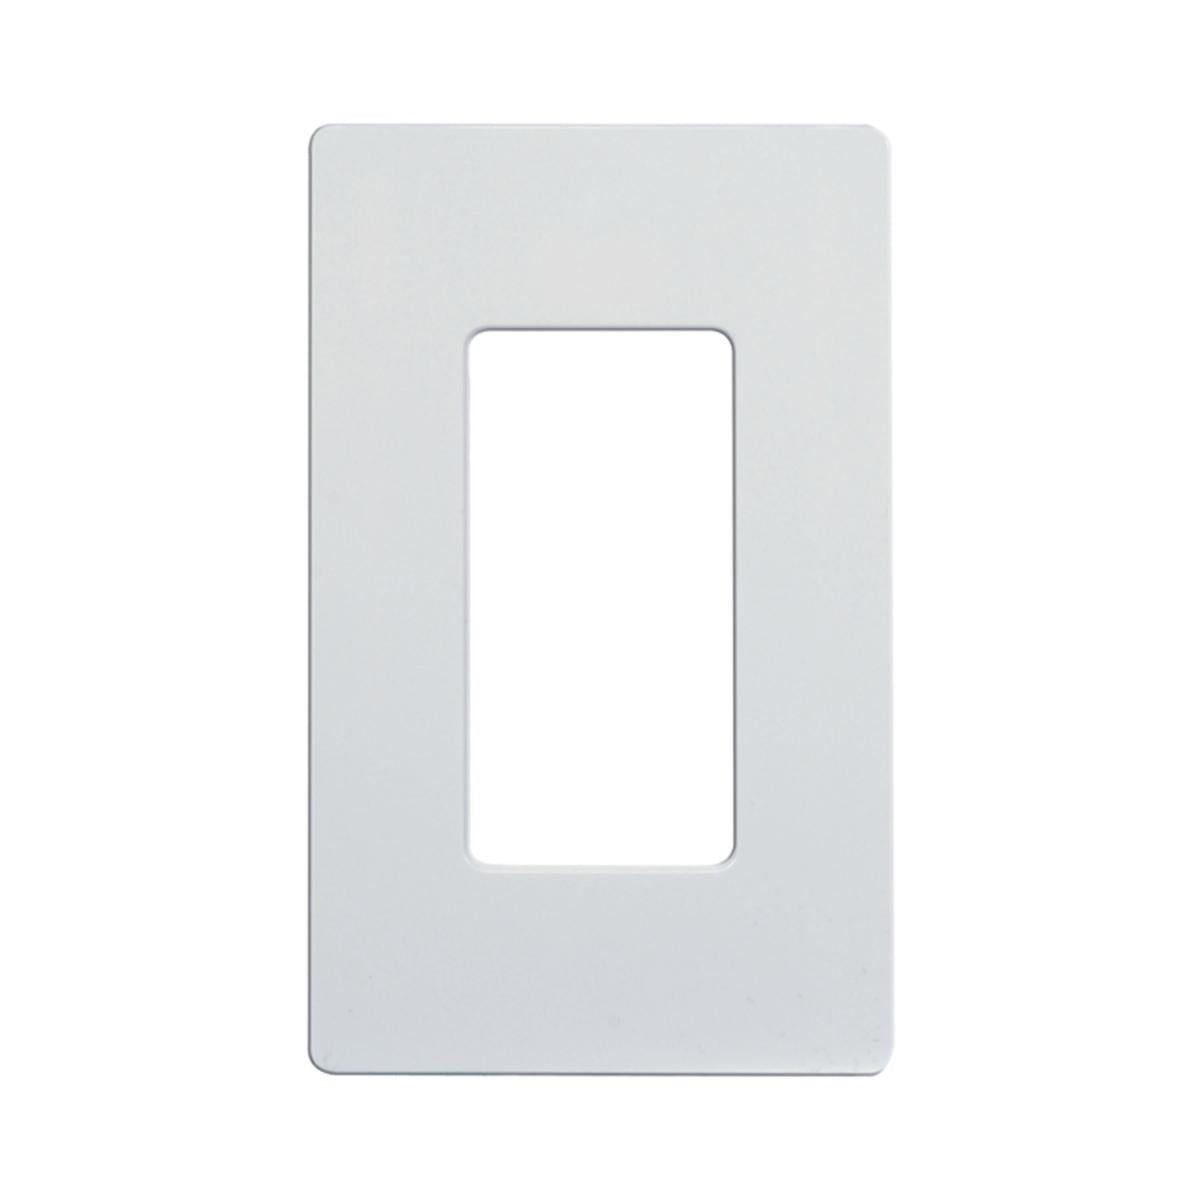 Satco 96-123 Wallplate For Dimmers And Sensors 1-Gang Almond Finish Lutron